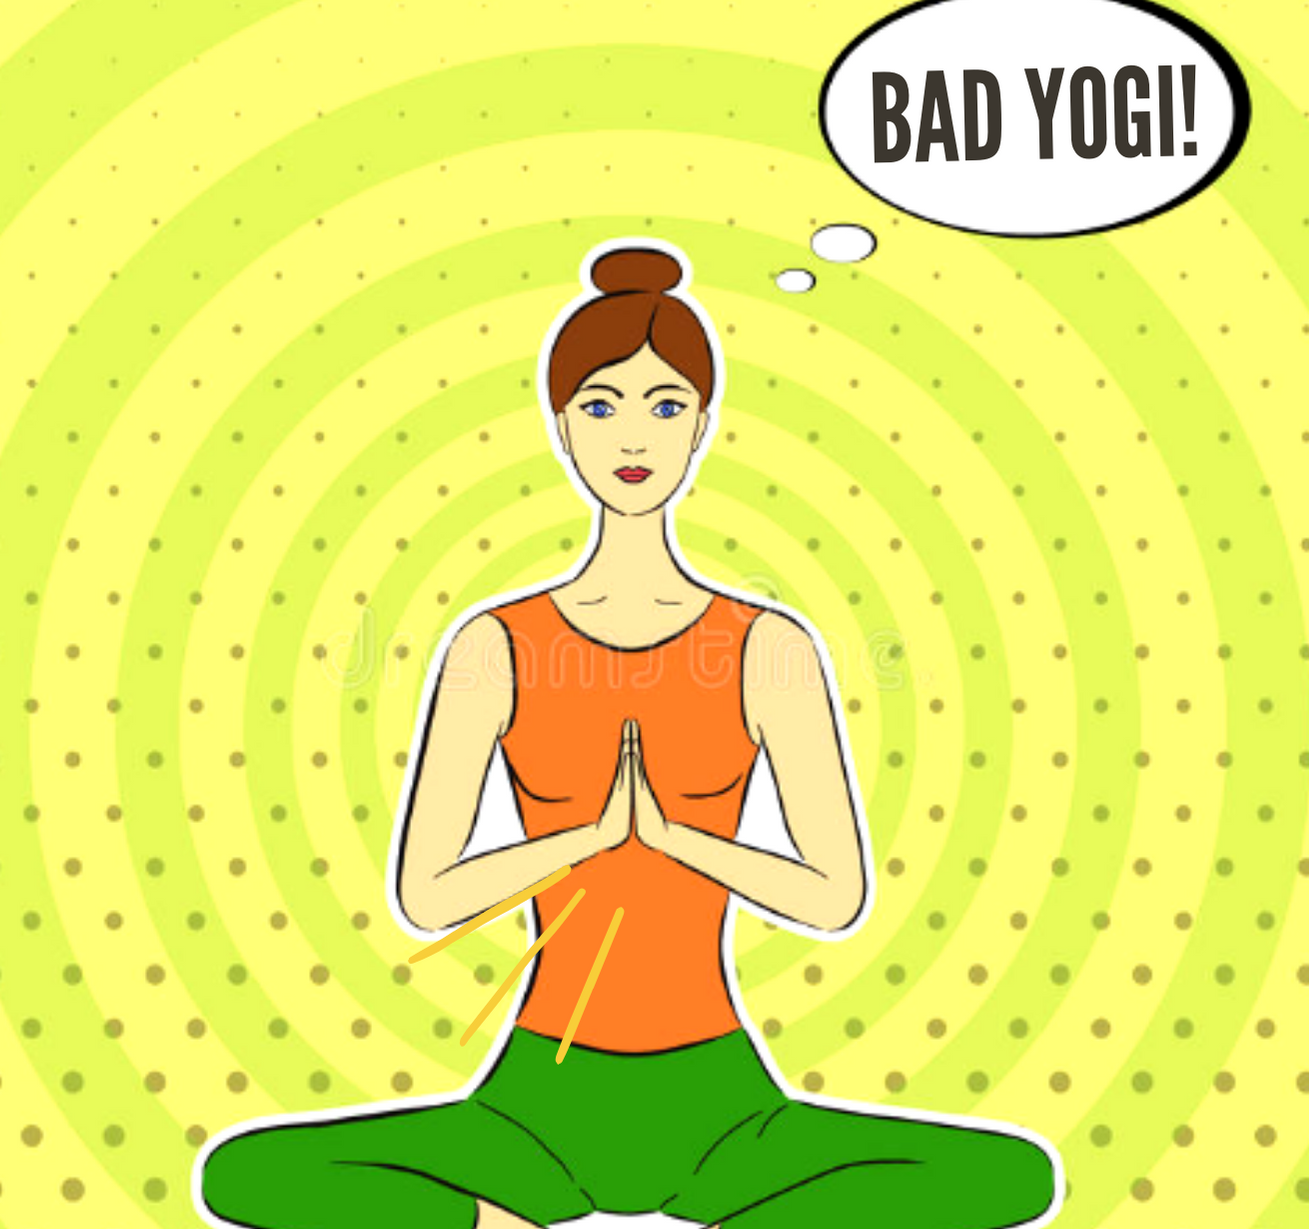 COVID-19 and your un-yogic thoughts